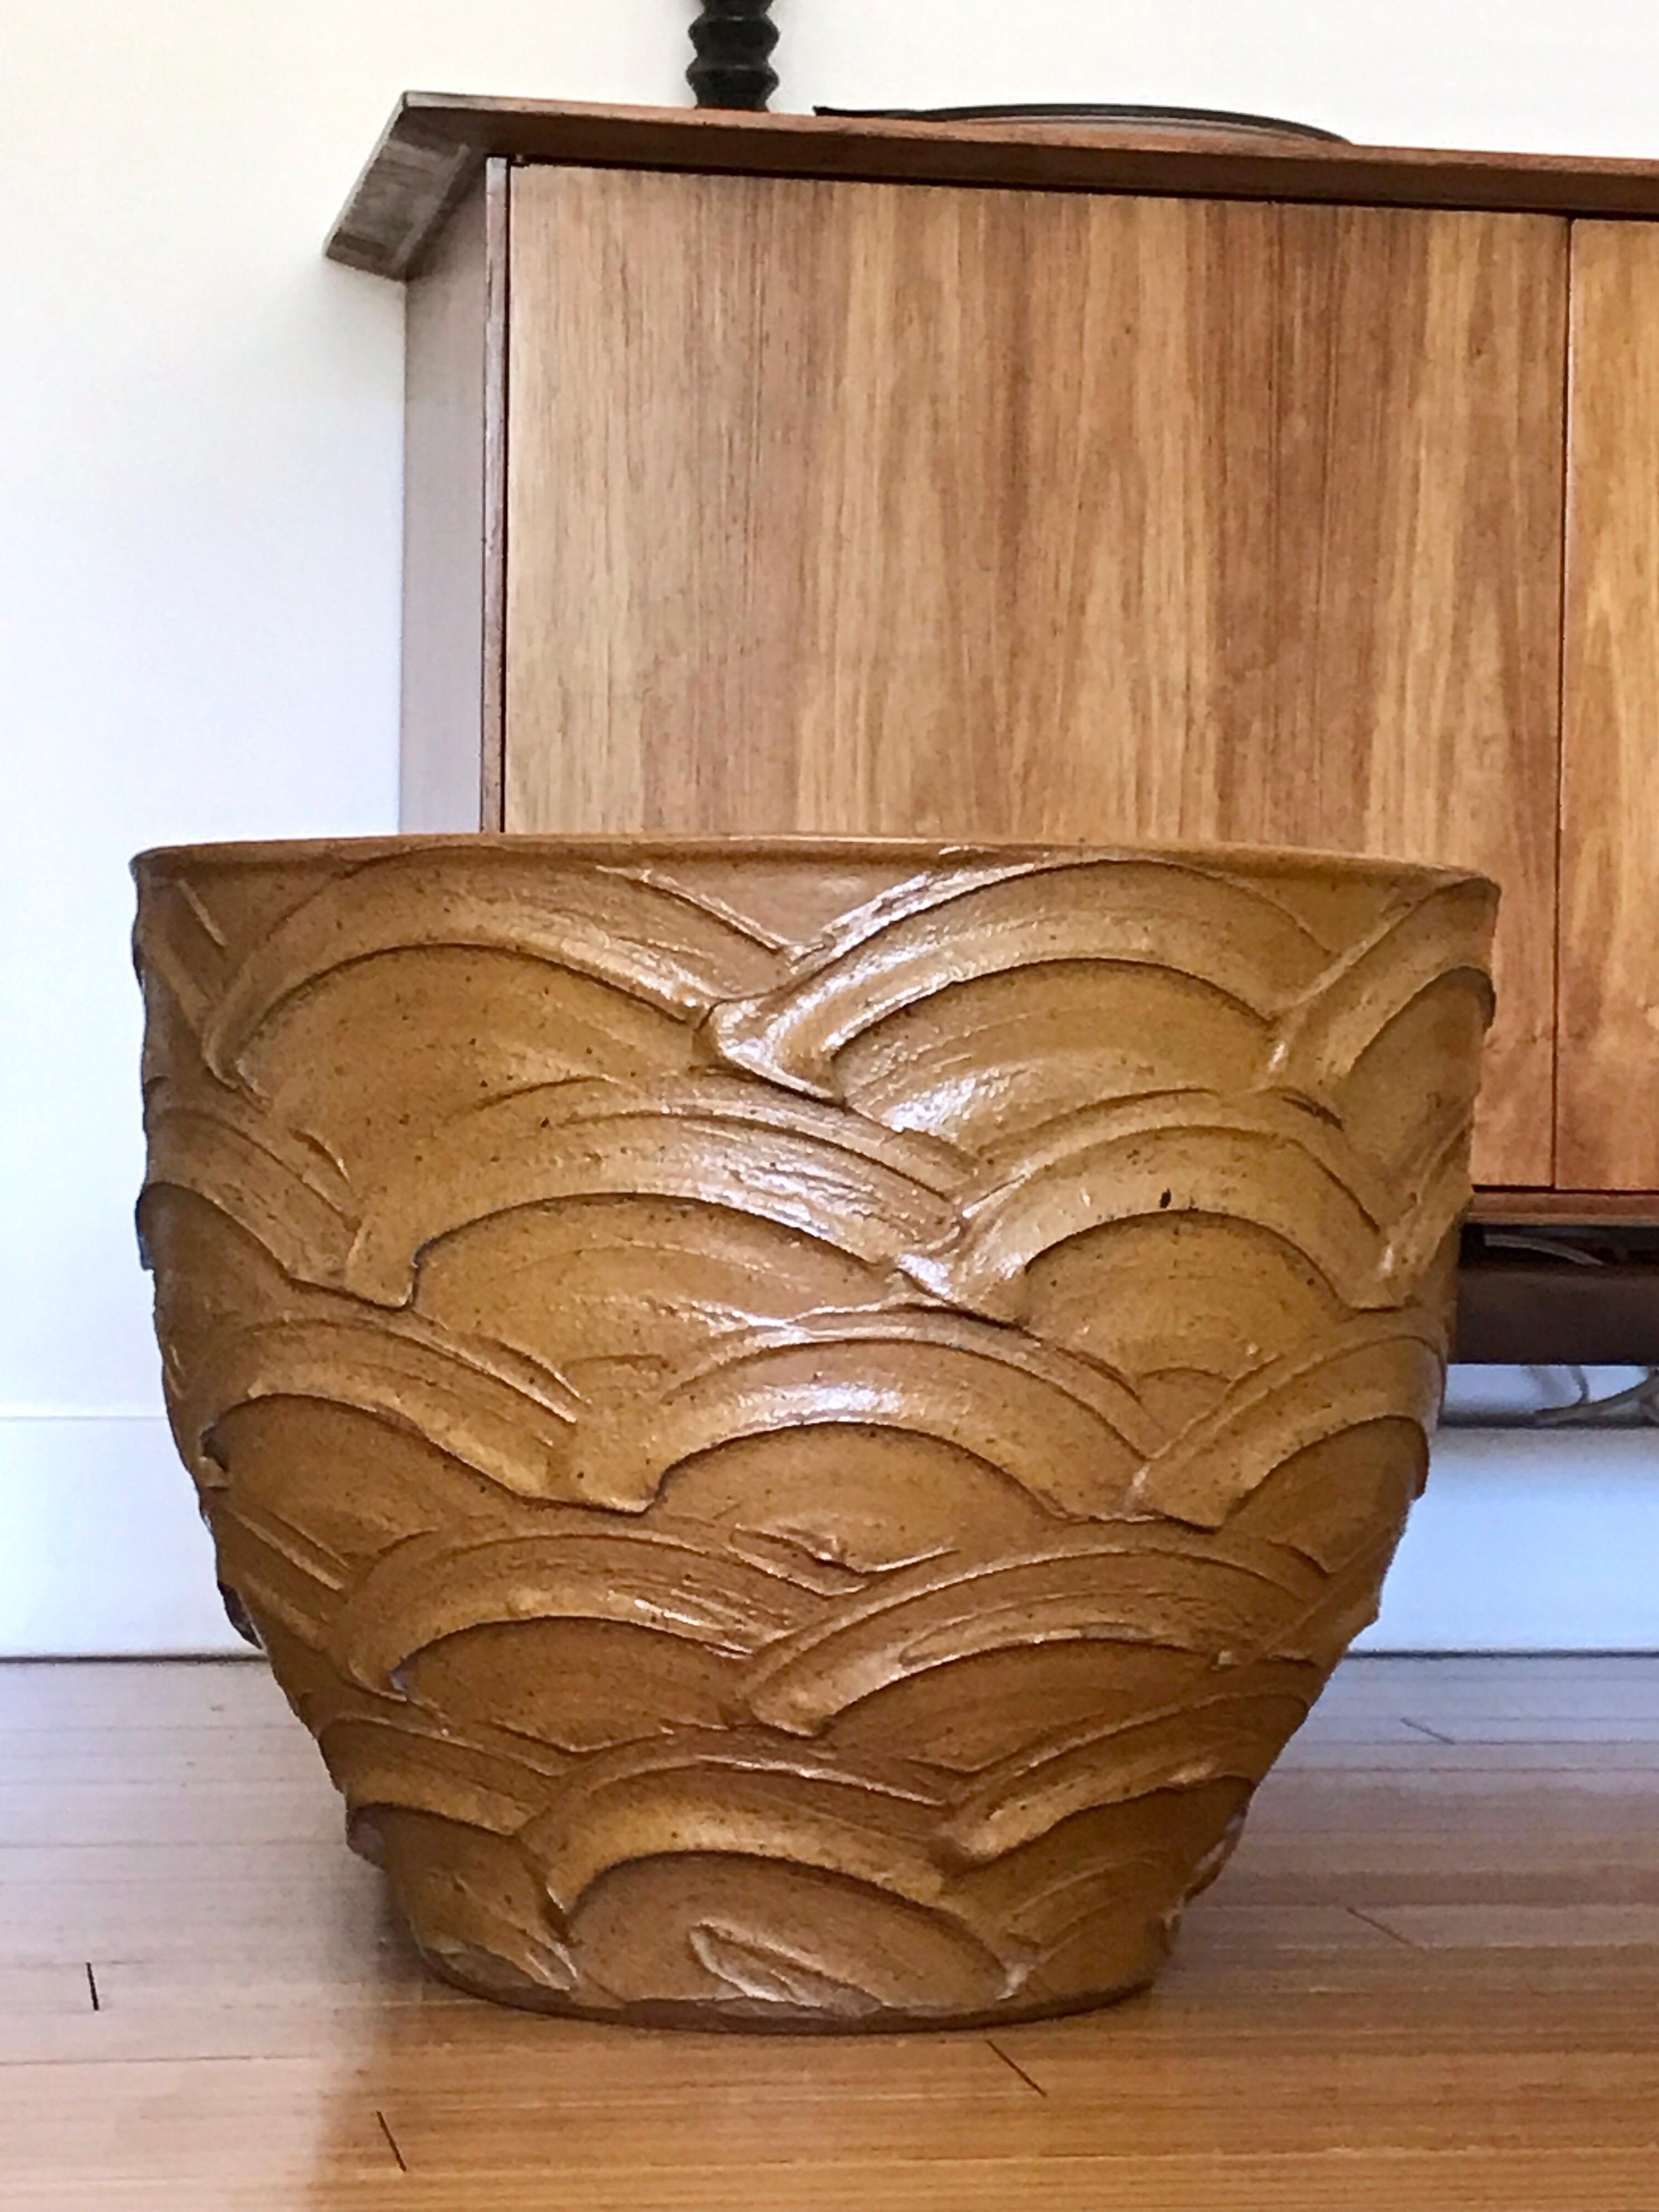 A great California design planter.
Handcrafted reduction fired stoneware with Cressey's own 